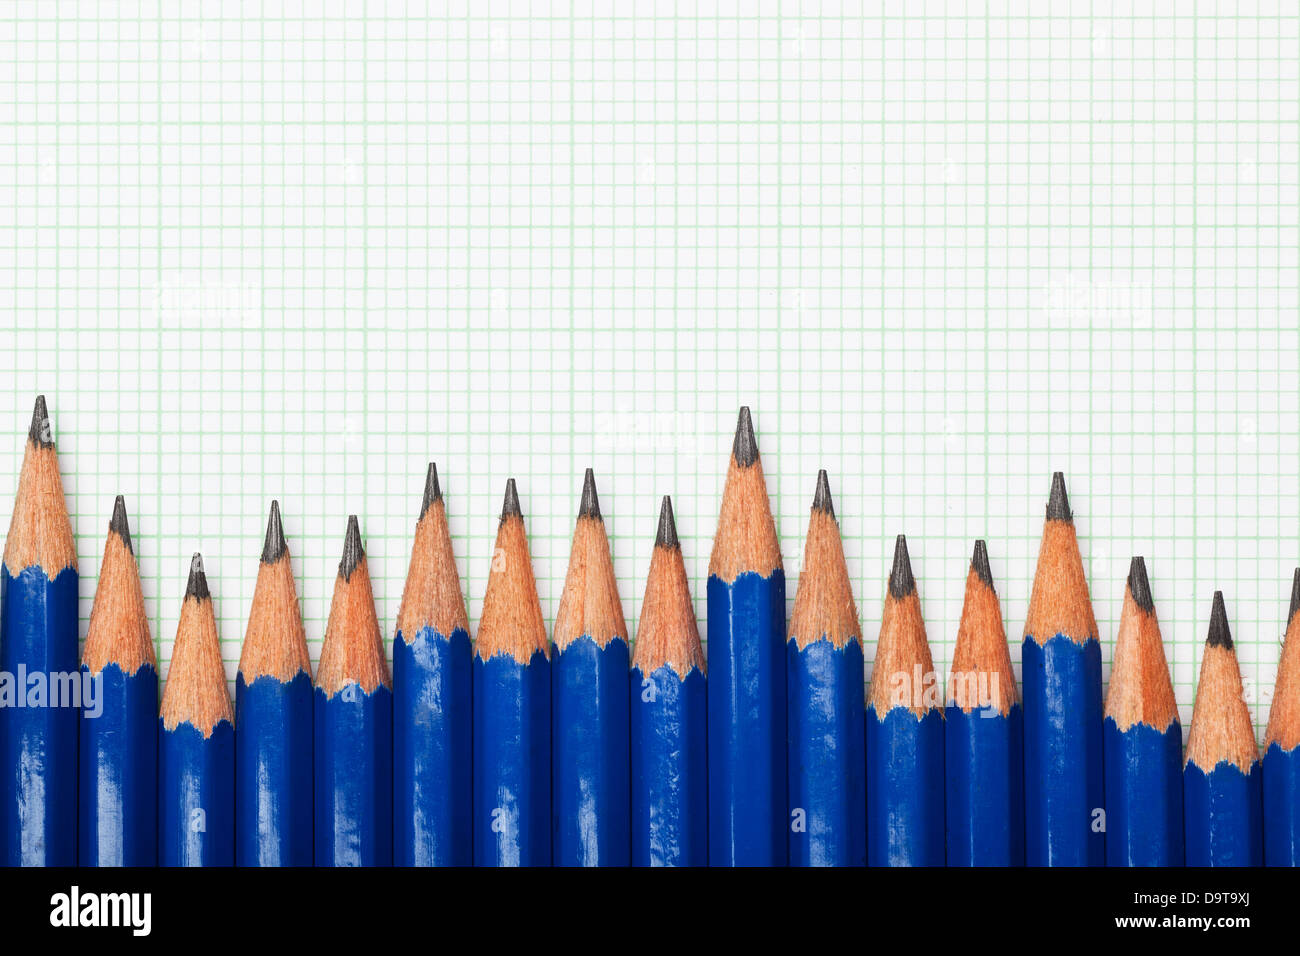 Row of pencils on a piece of graph paper Stock Photo